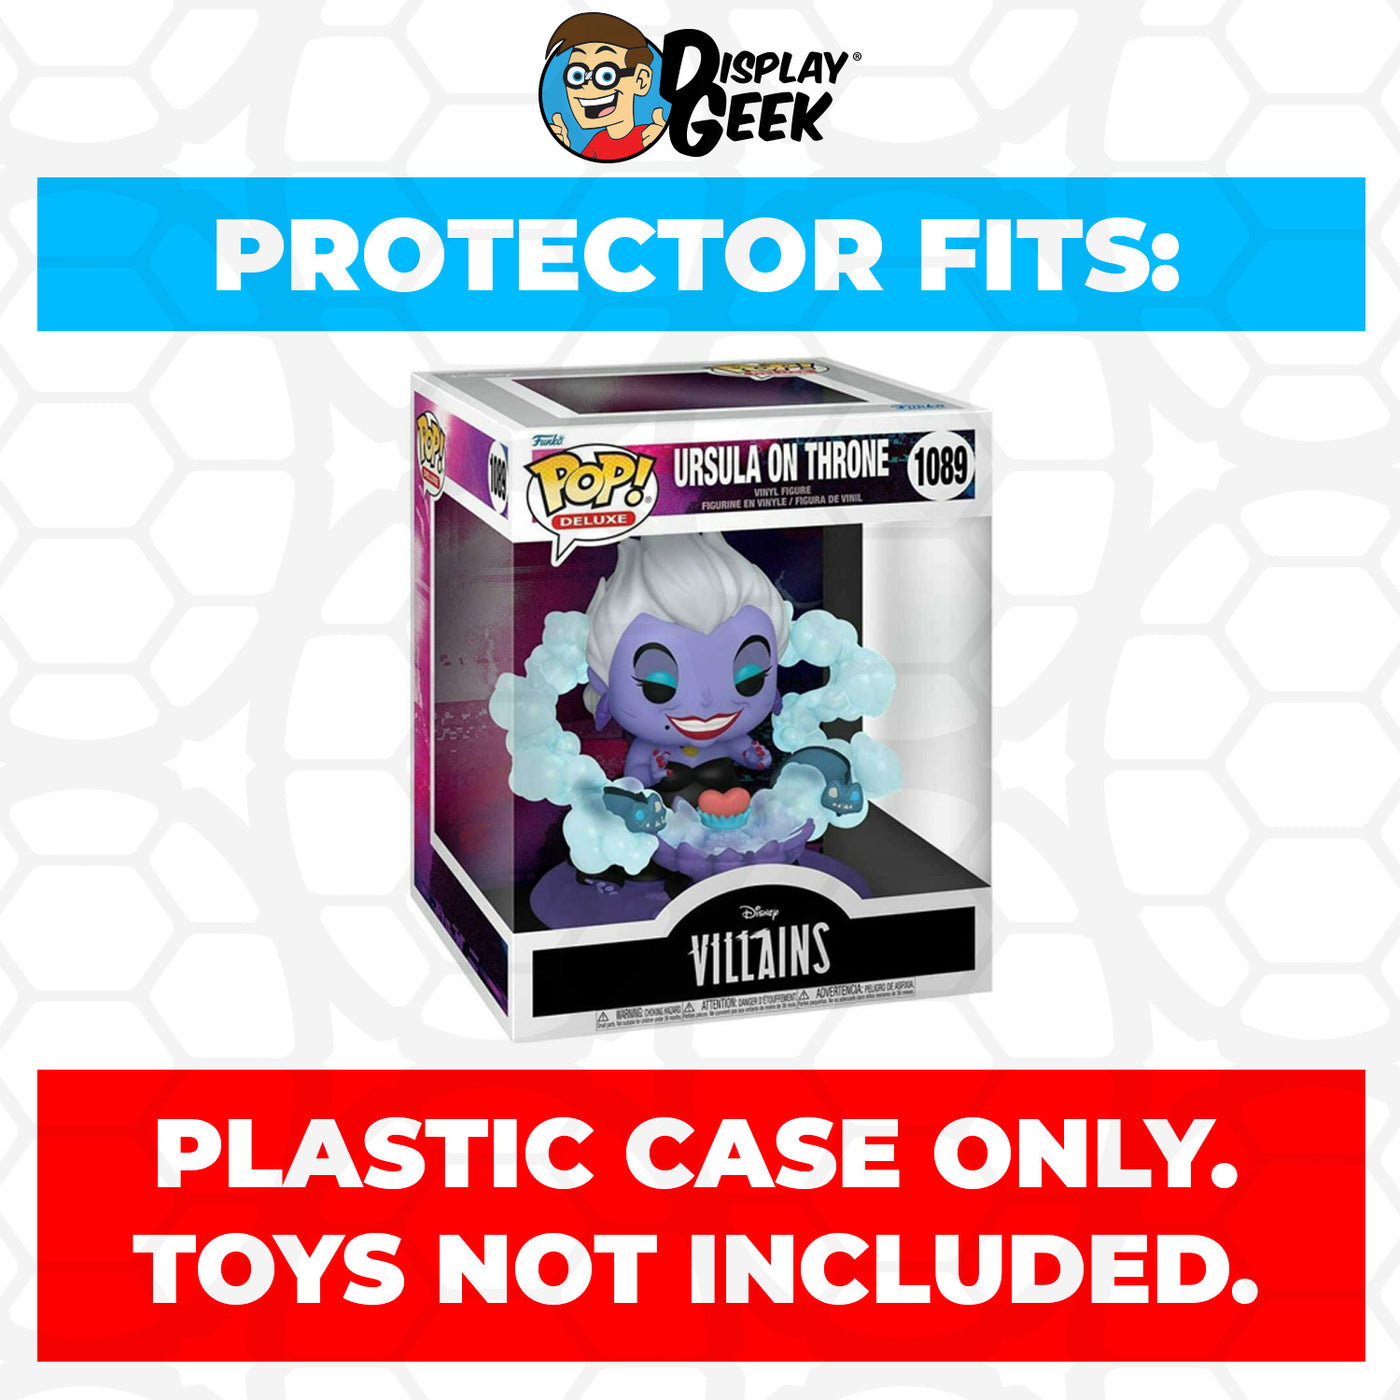 Pop Protector for Ursula on Throne #1089 Funko Pop Deluxe on The Protector Guide App by Display Geek